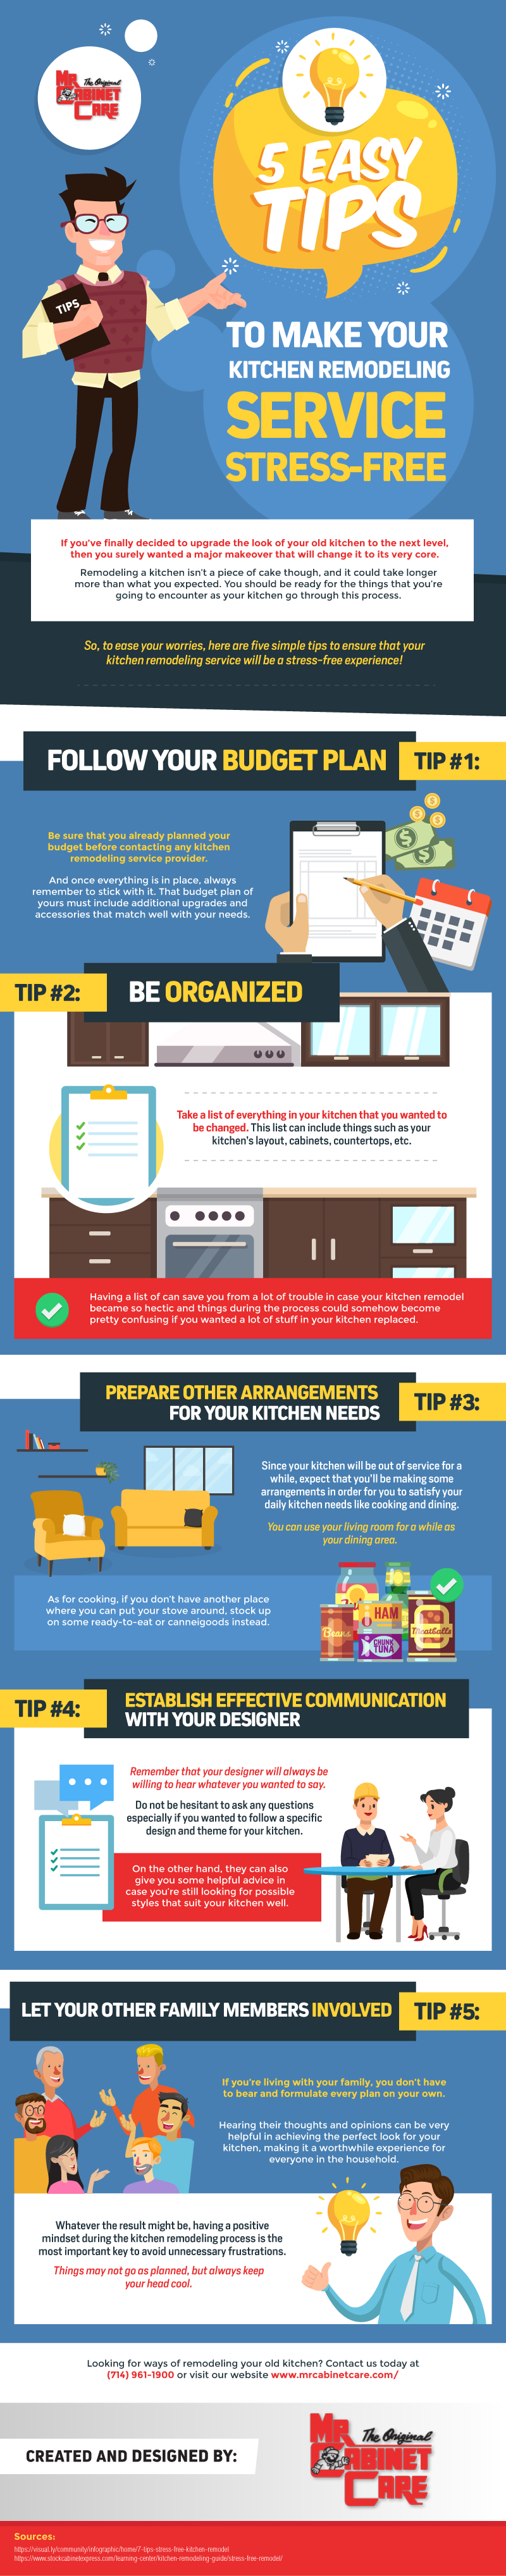 5 Easy Tips to Make Your Kitchen Remodeling Service Stress-Free - Infographic